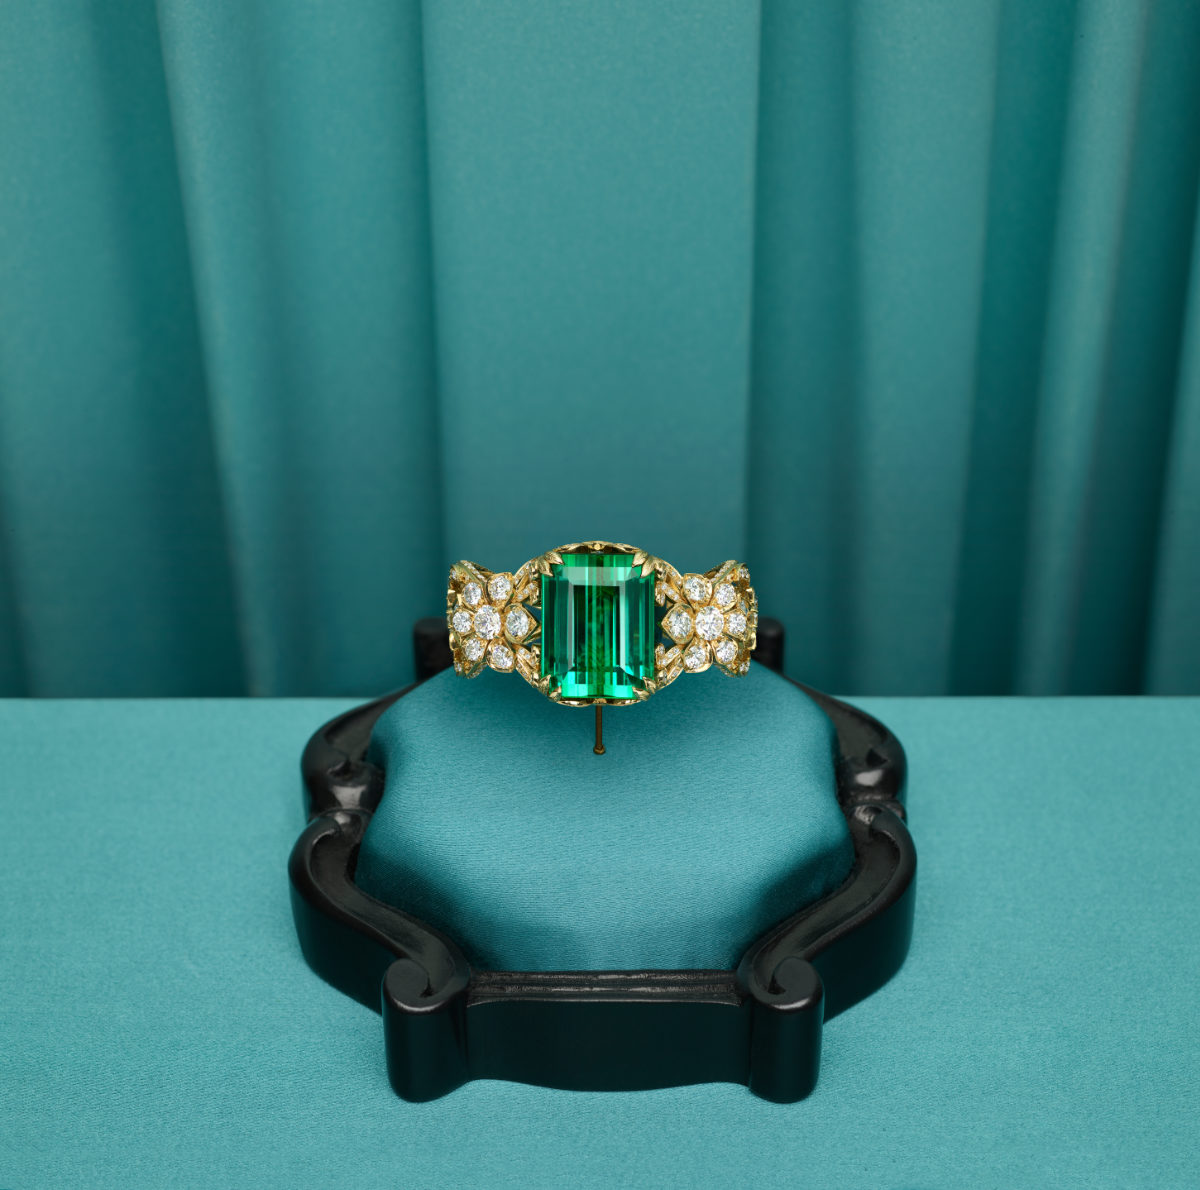 Gucci Presents An Exclusive Selection Of New Hortus Deliciarum High Jewelry Pieces